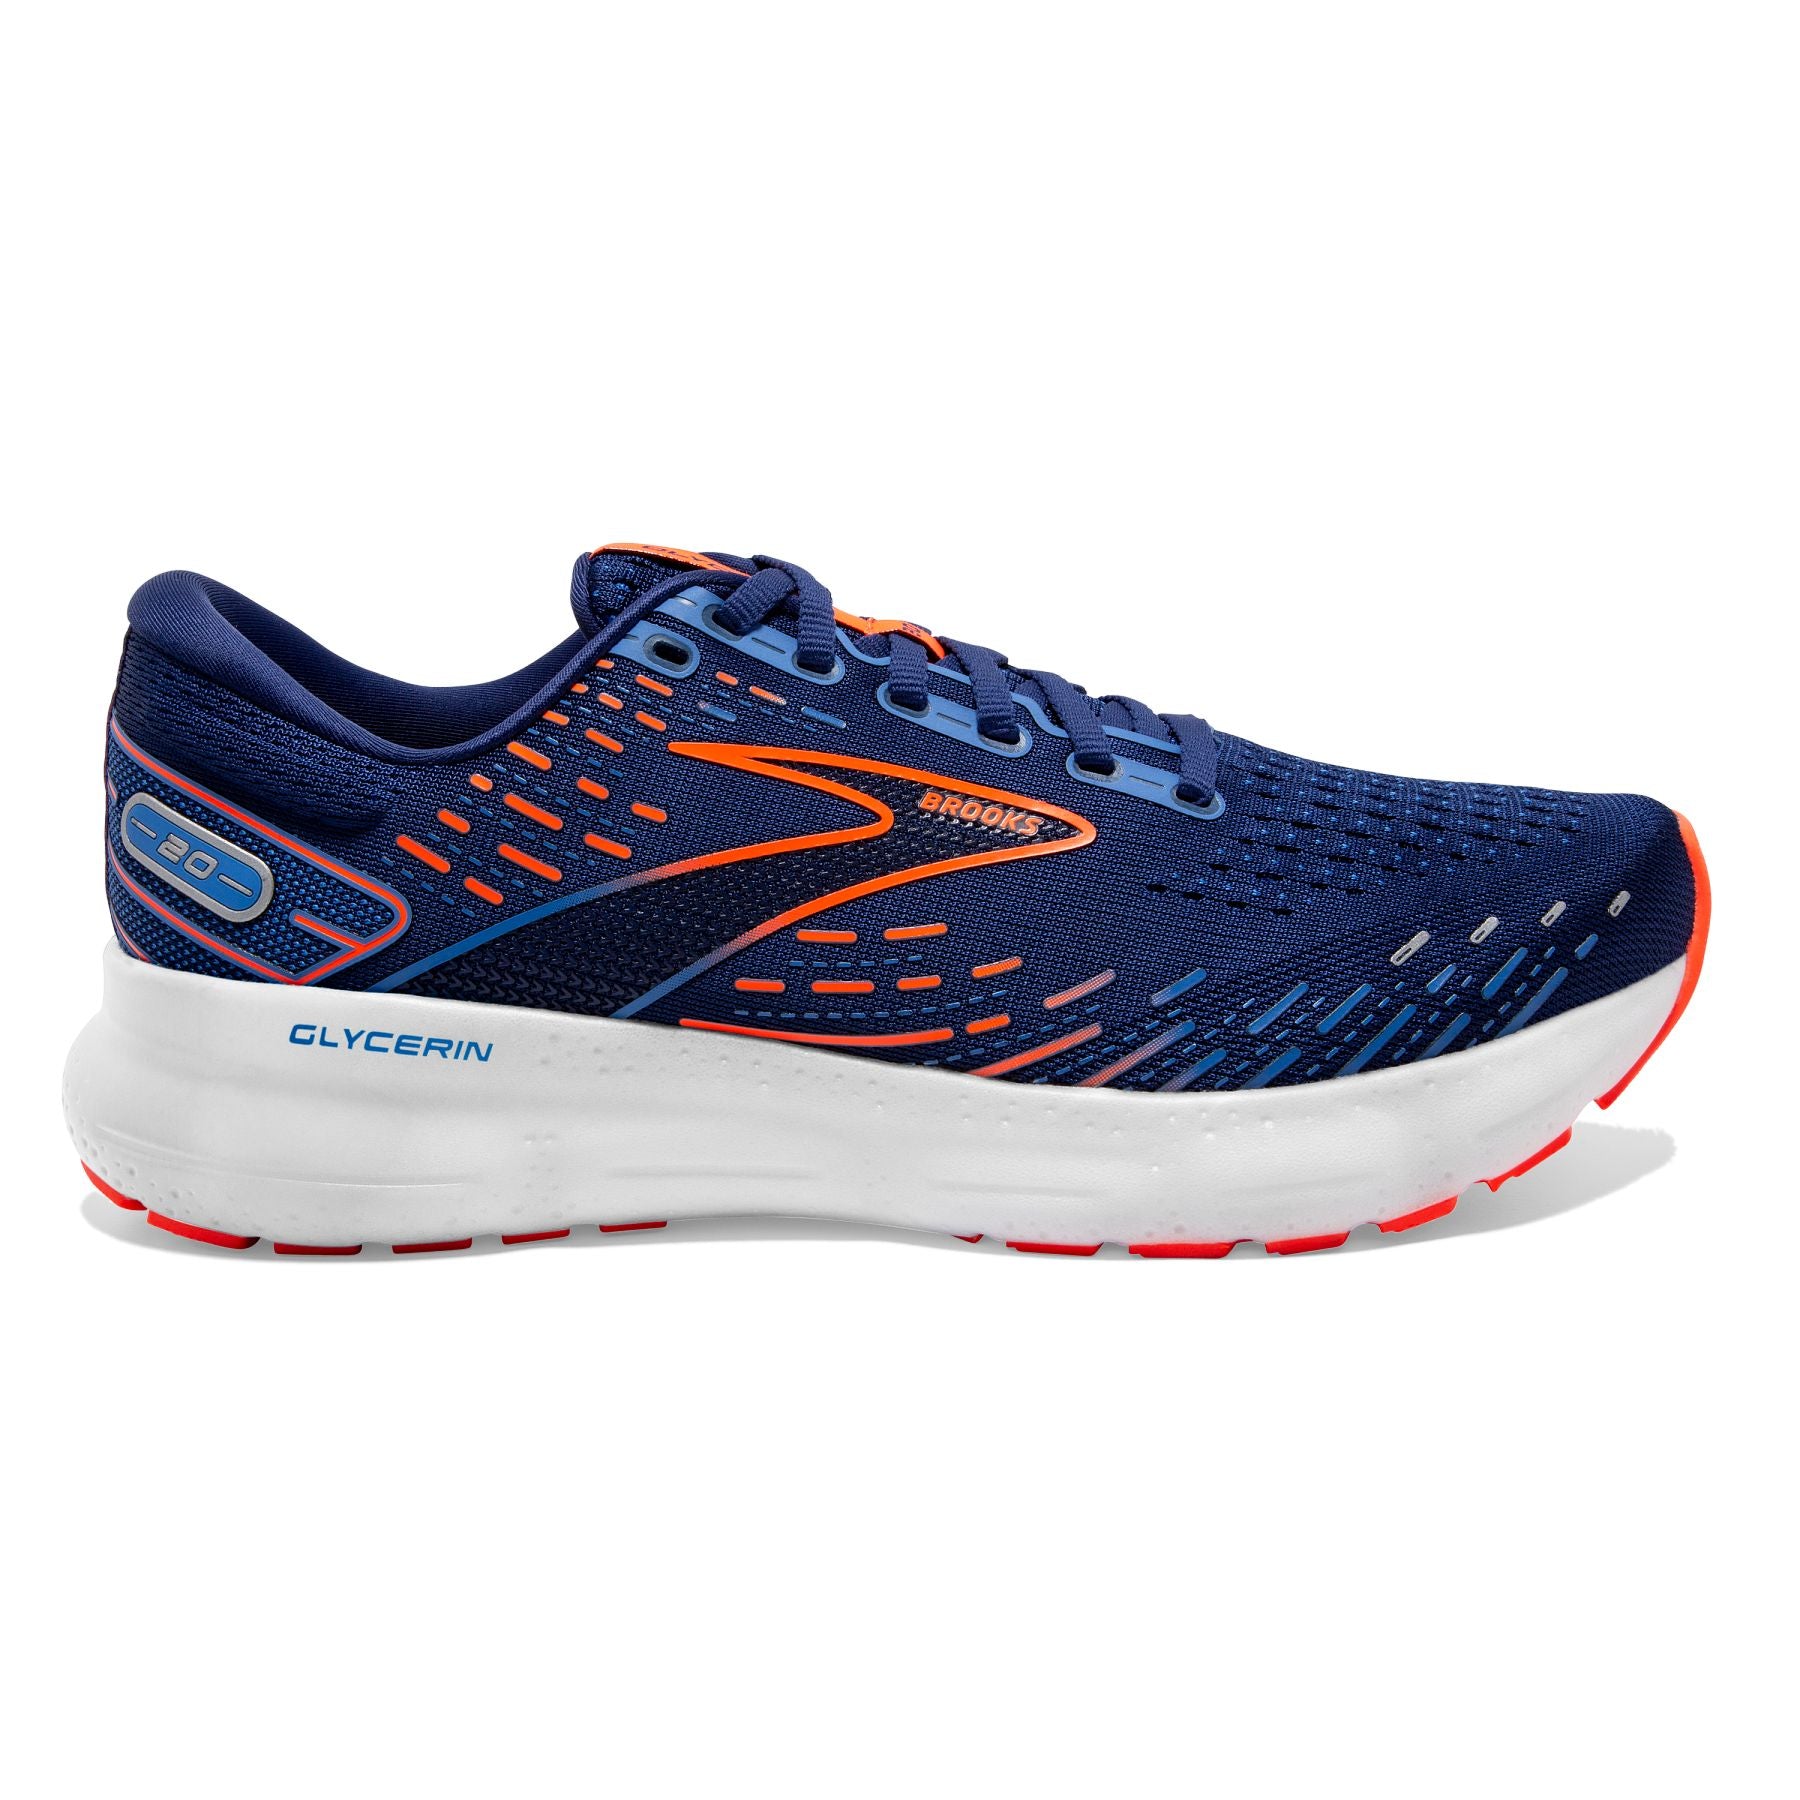 Lateral view of the Men's Glycerin 20 in Blue Depths/Palace Blue/Orange